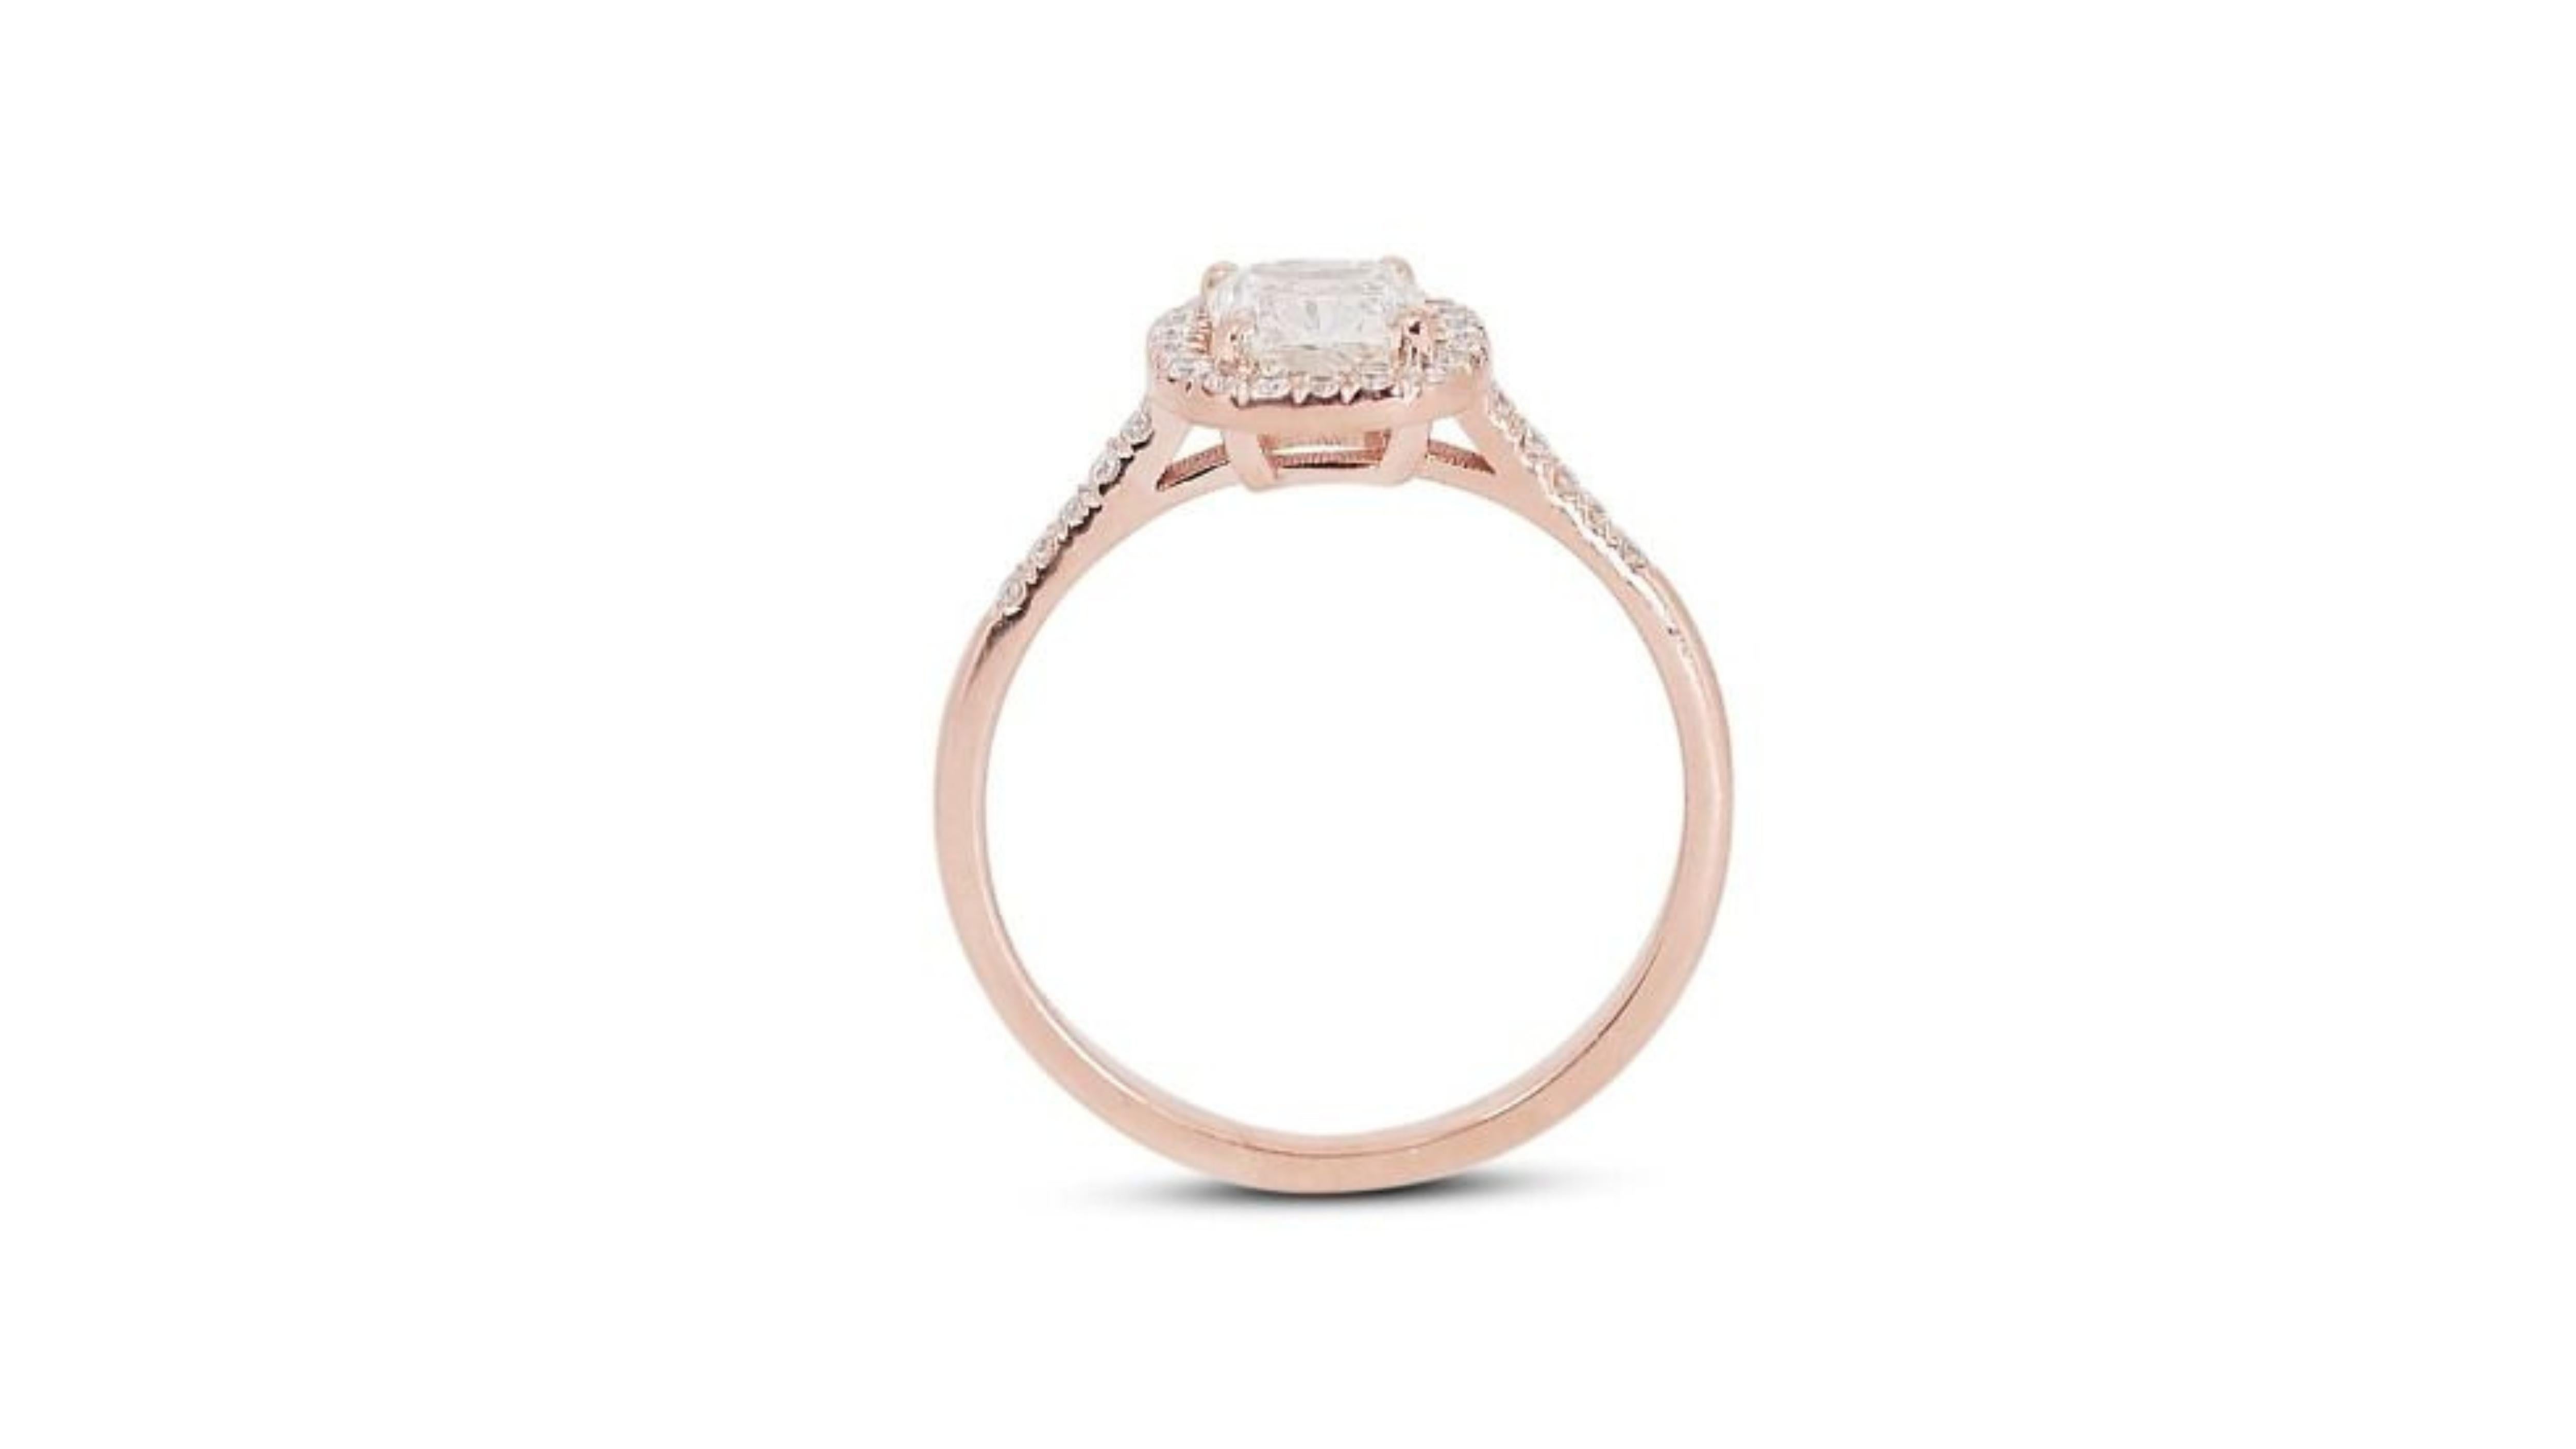 Stunning 18K Rose Gold Ring with Dazzling 1 carat Cushion Shape Natural Diamond For Sale 1